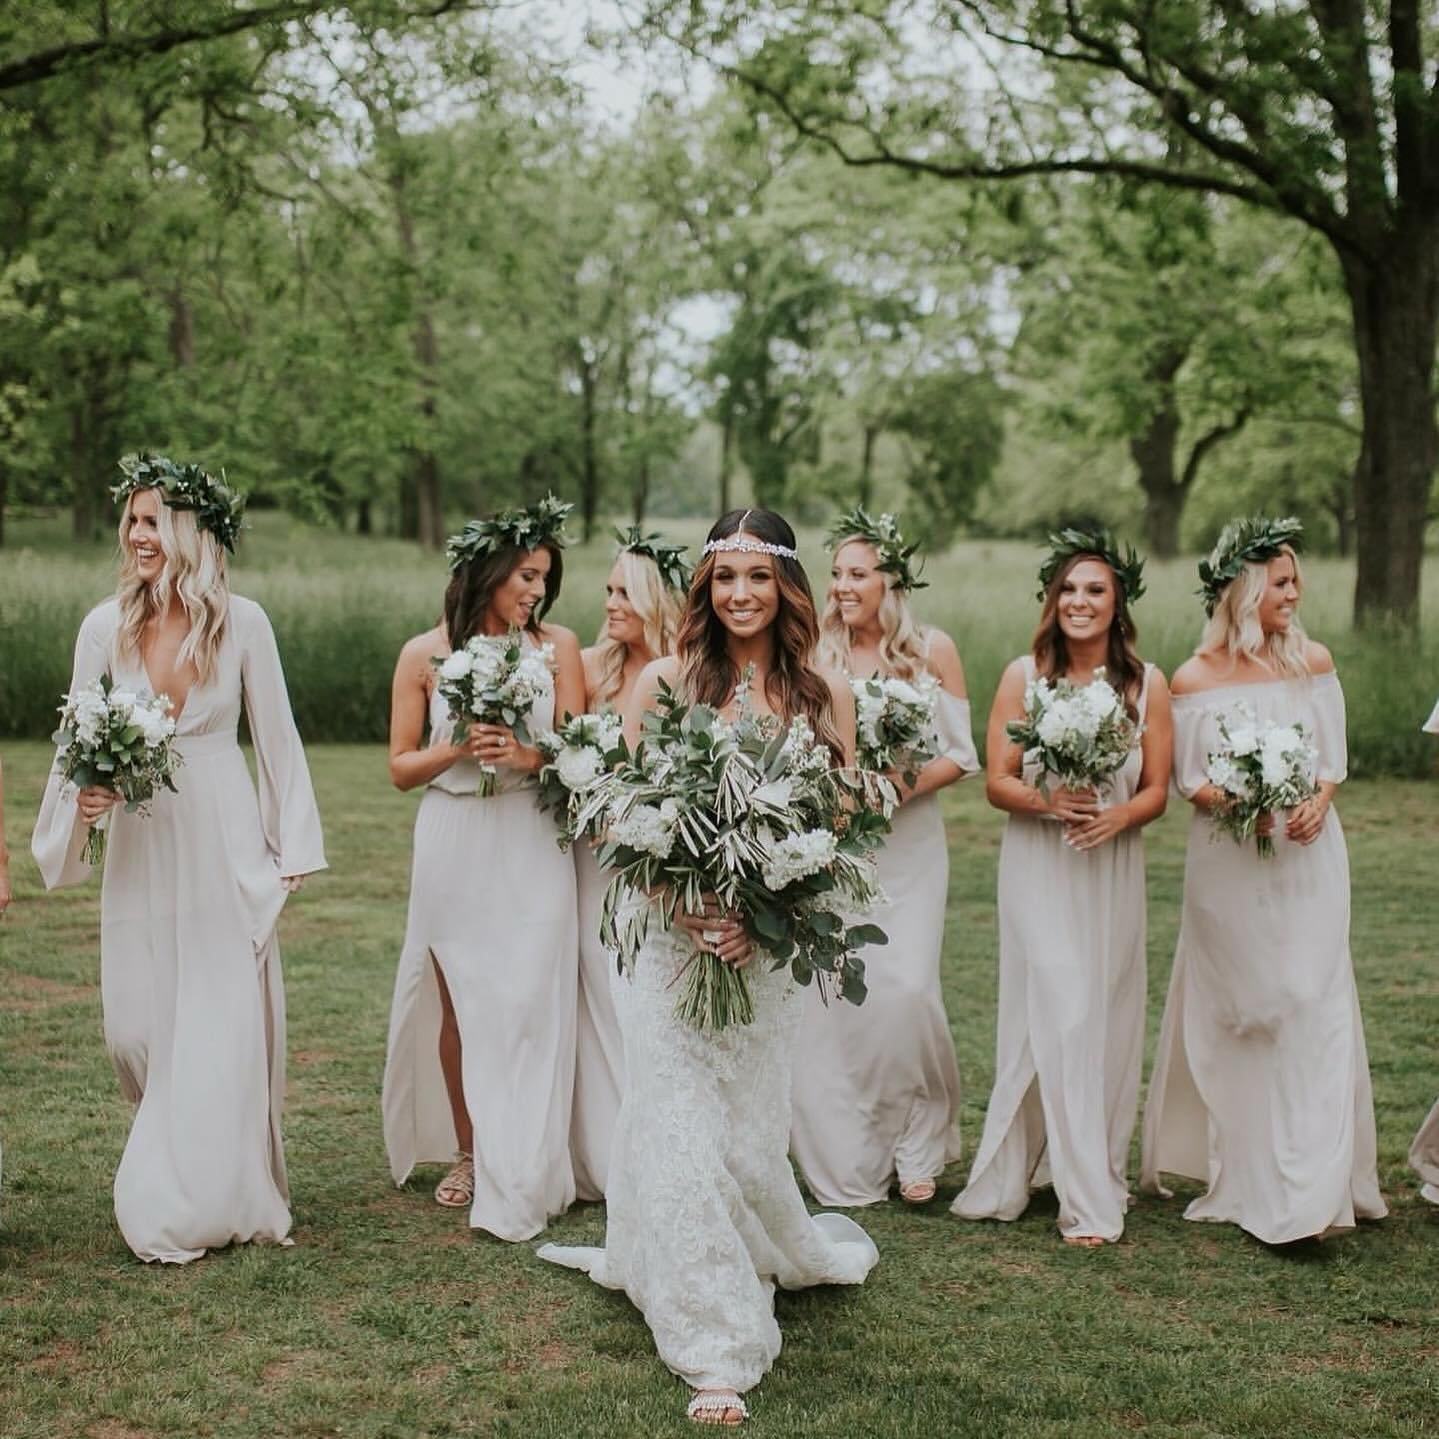 Sundays are for the girls and summer is for weddings! Click the link in our profile to schedule your tour and snag one of our remaining summer dates!

Photo: @@ataylorpowell_
Venue: @cloverleaffarm
Floral + Decor: @adedesignstudio
Catering + Service: